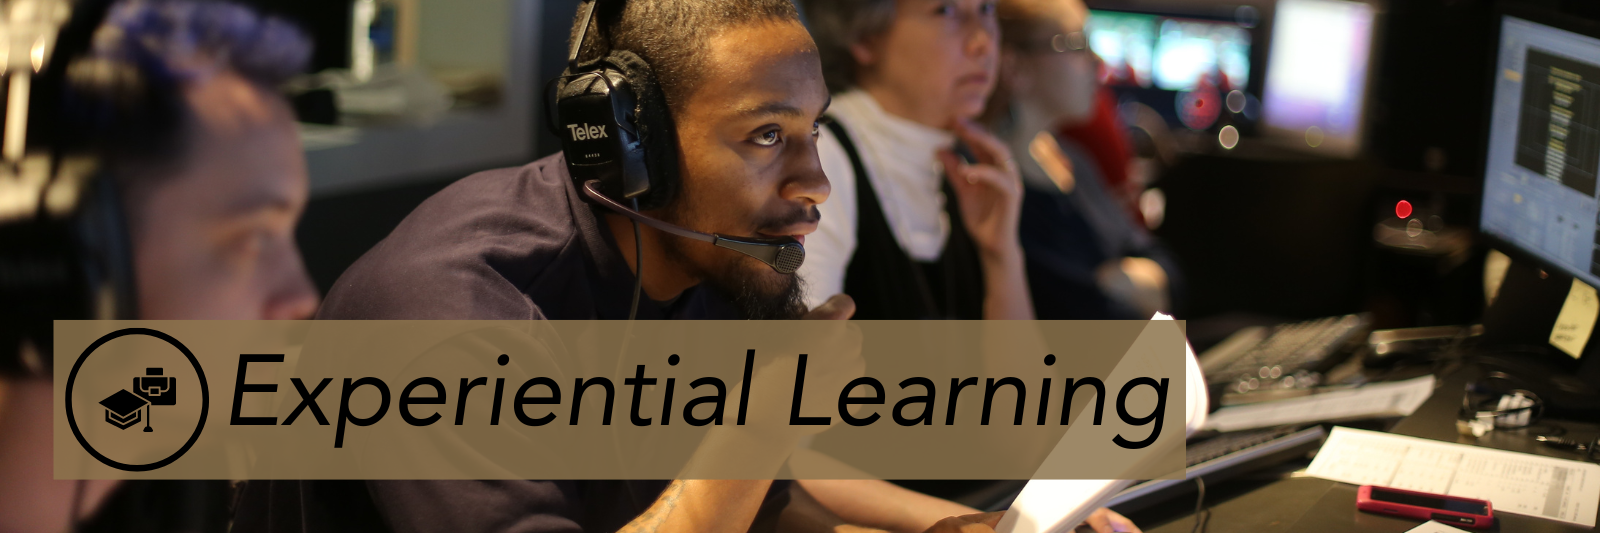 experiential learning webpage